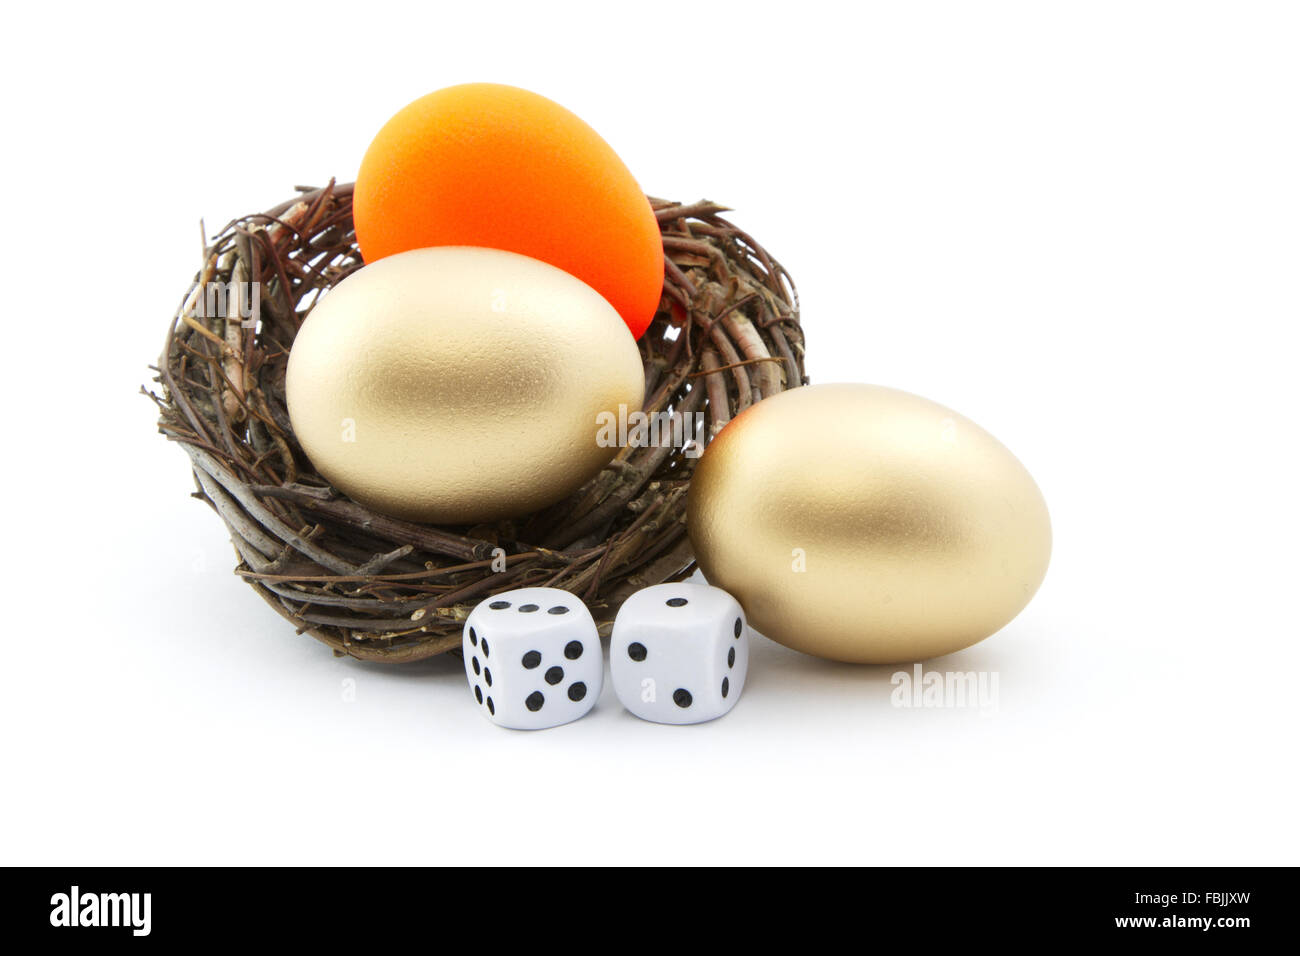 Gamble and risk dangers in troubled economic environment impact savings and nest eggs. Stock Photo